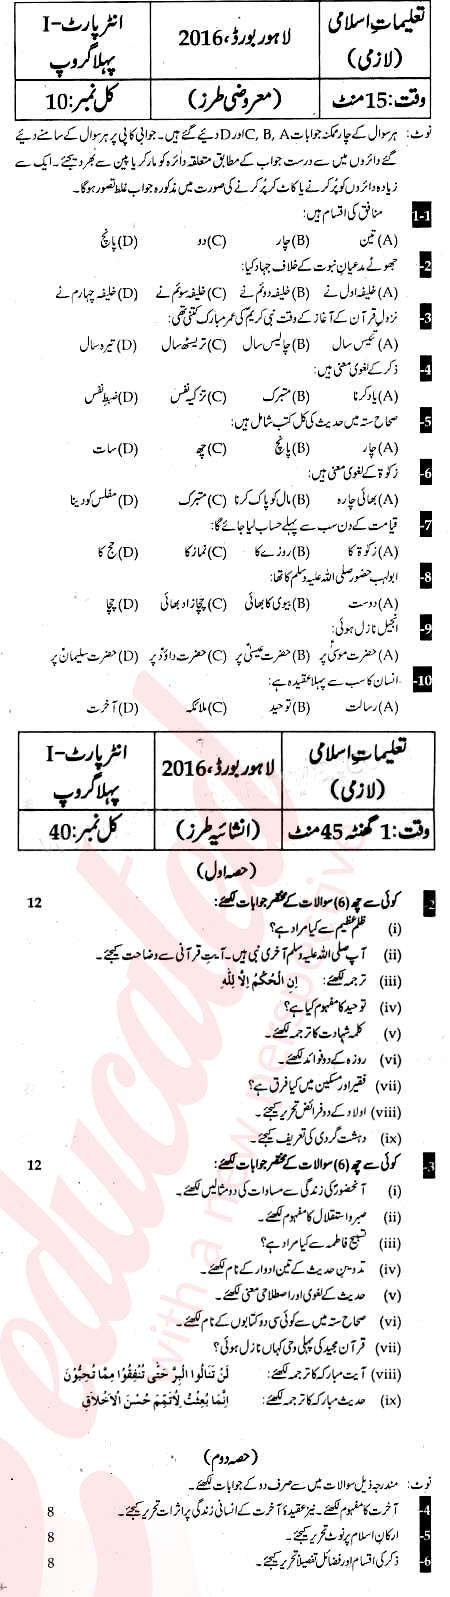 Islamic Studies 11th class Past Paper Group 1 BISE Lahore 2016